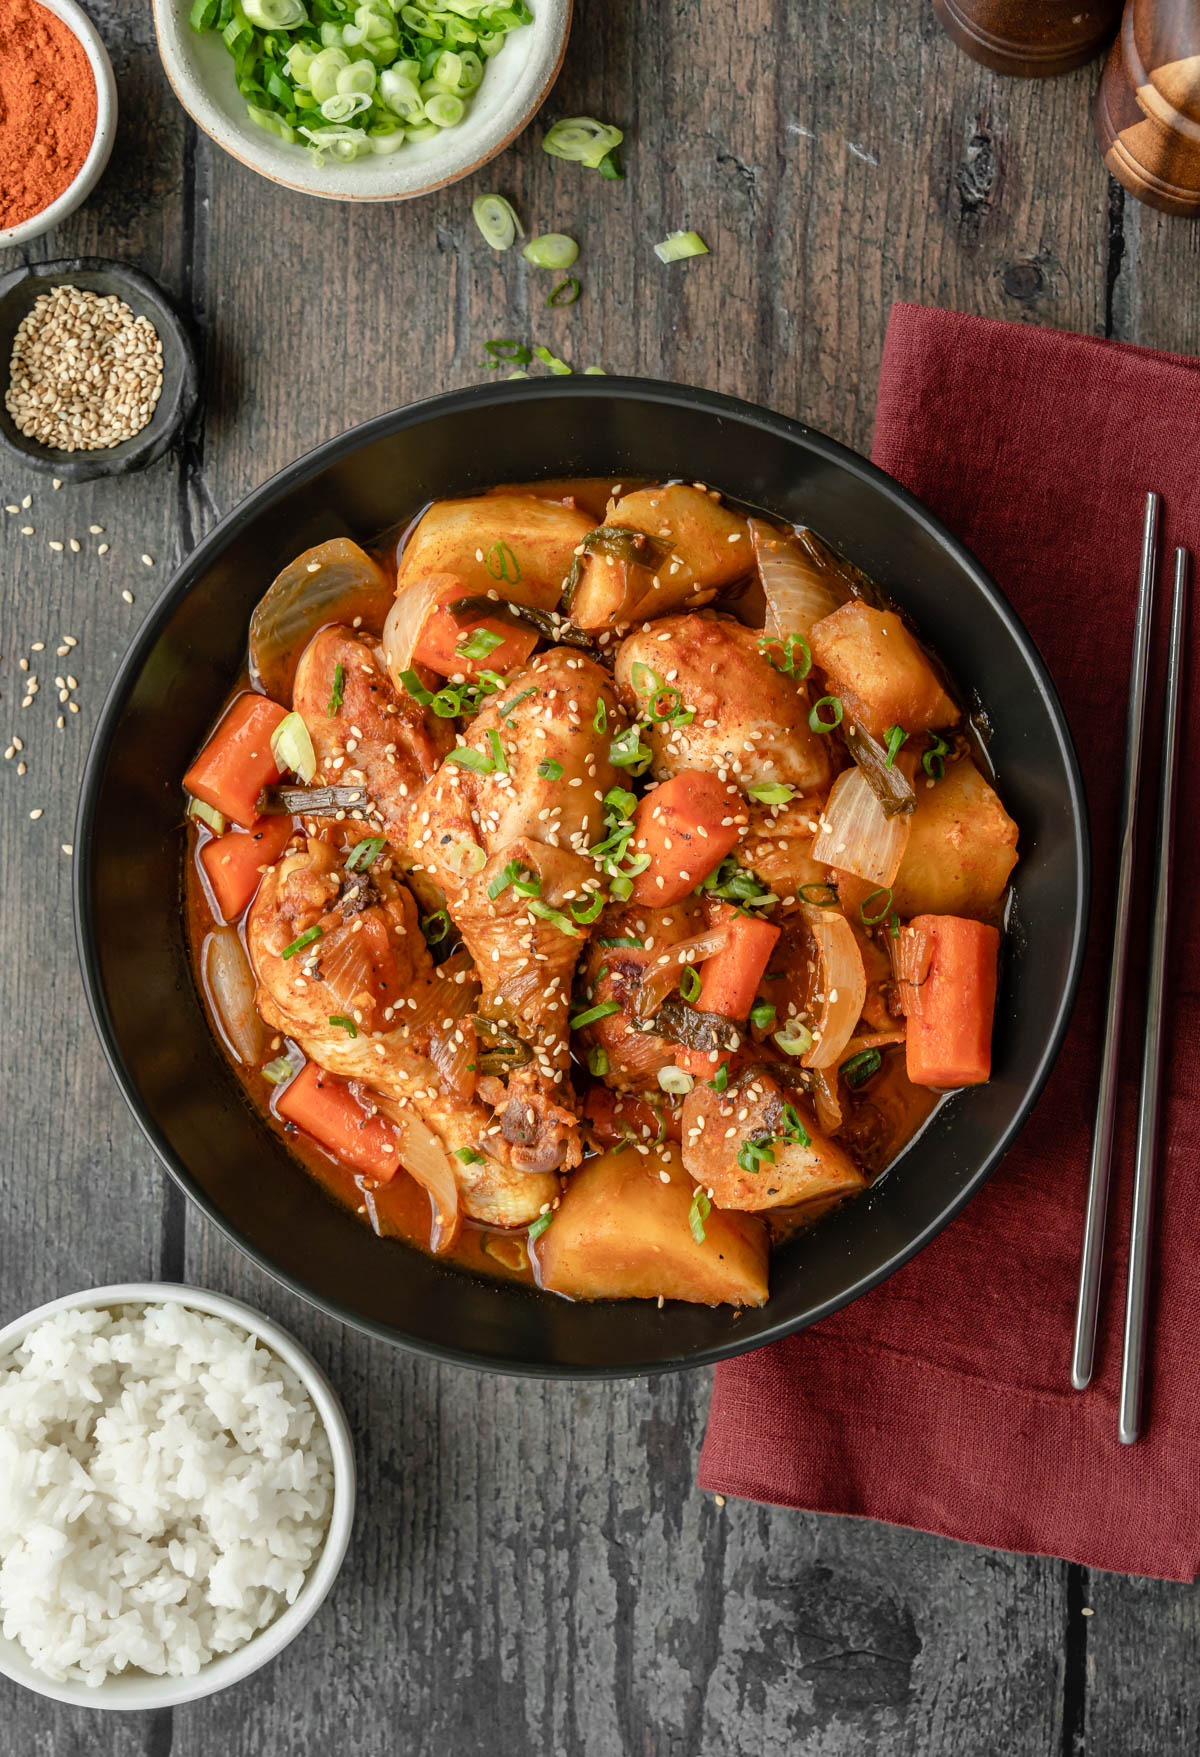 This homemade Instant Pot Dak Dori Tang is the perfect meal to make for dinner! Chicken drumsticks are cooked in a sweet and spicy marinade with onion, potatoes, and carrots. This classic Korean soup is cozy, delicious, and easy! One pot, dairy free, 35 minutes.